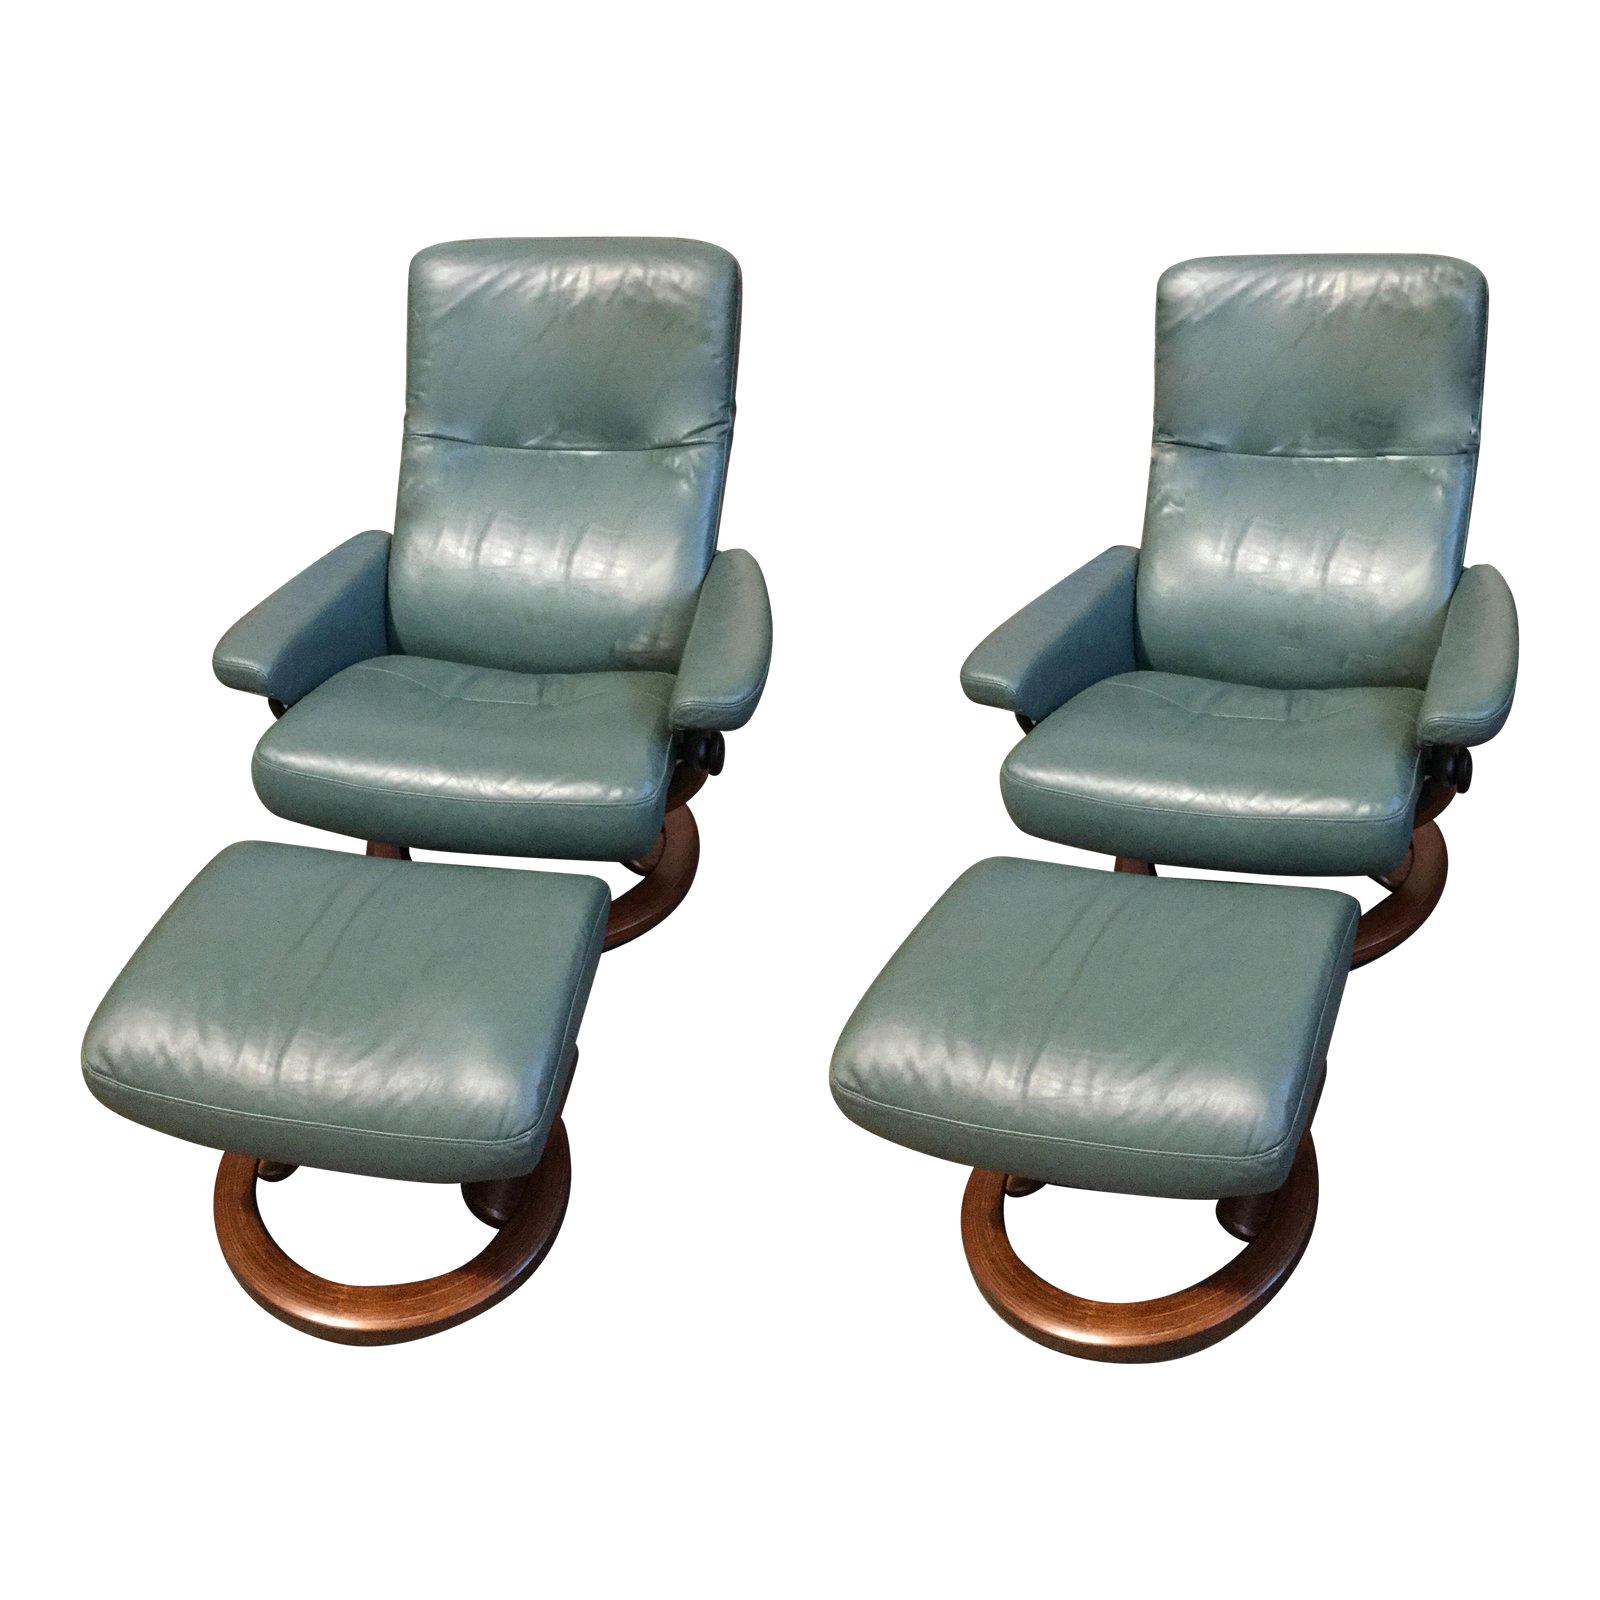 Super Cool Mid-Century Modern Stressless Chairs with Ottomans